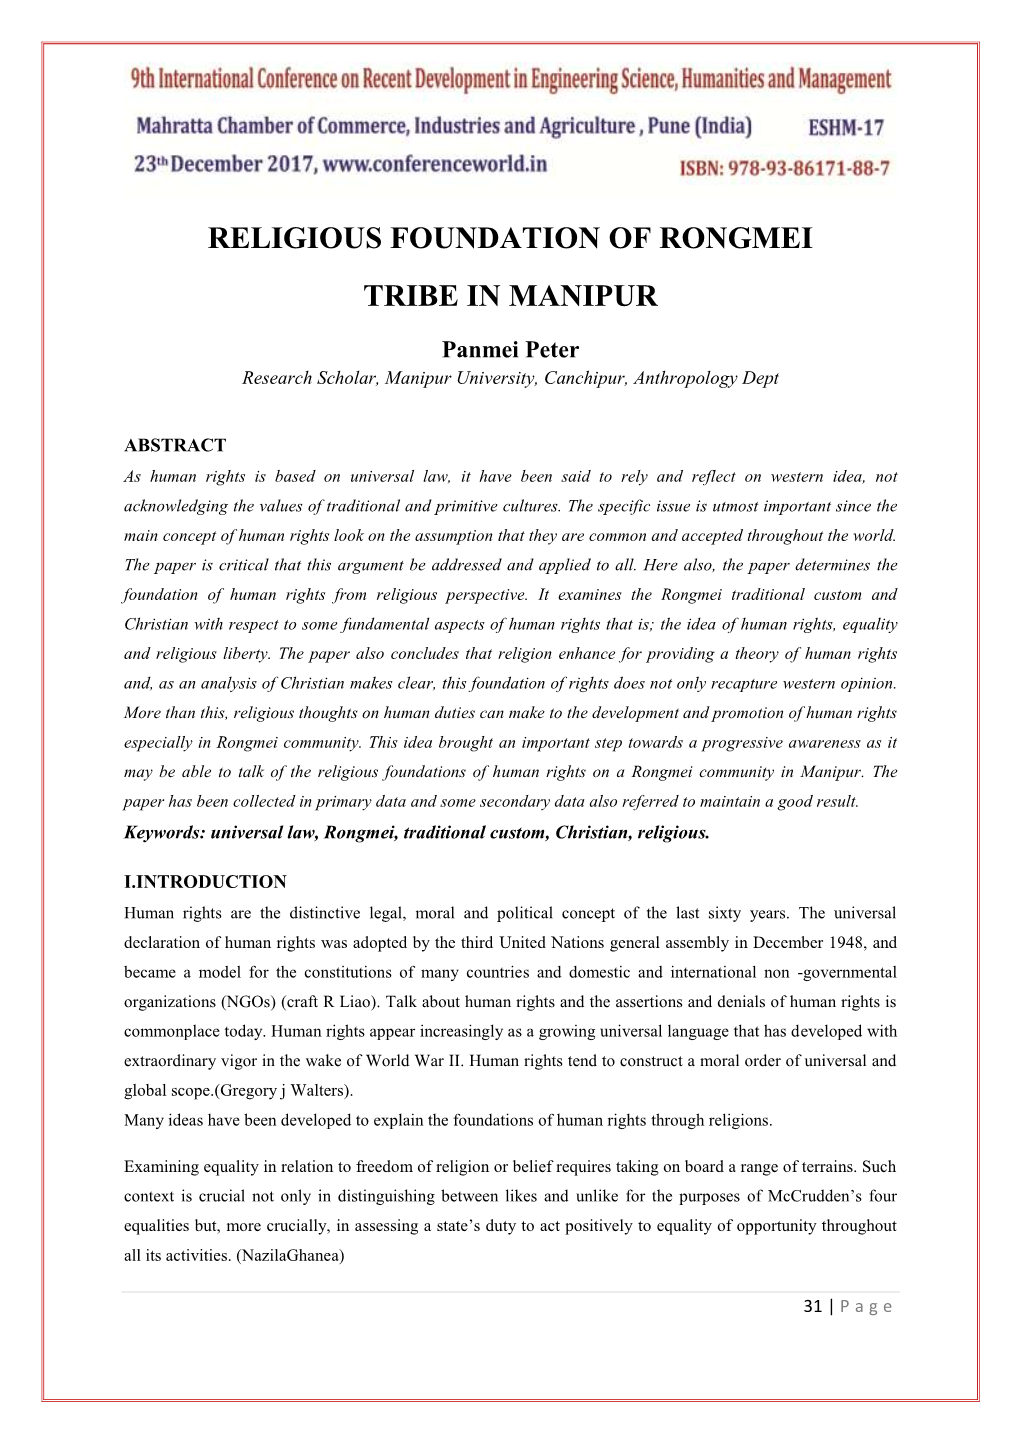 Religious Foundation of Rongmei Tribe in Manipur